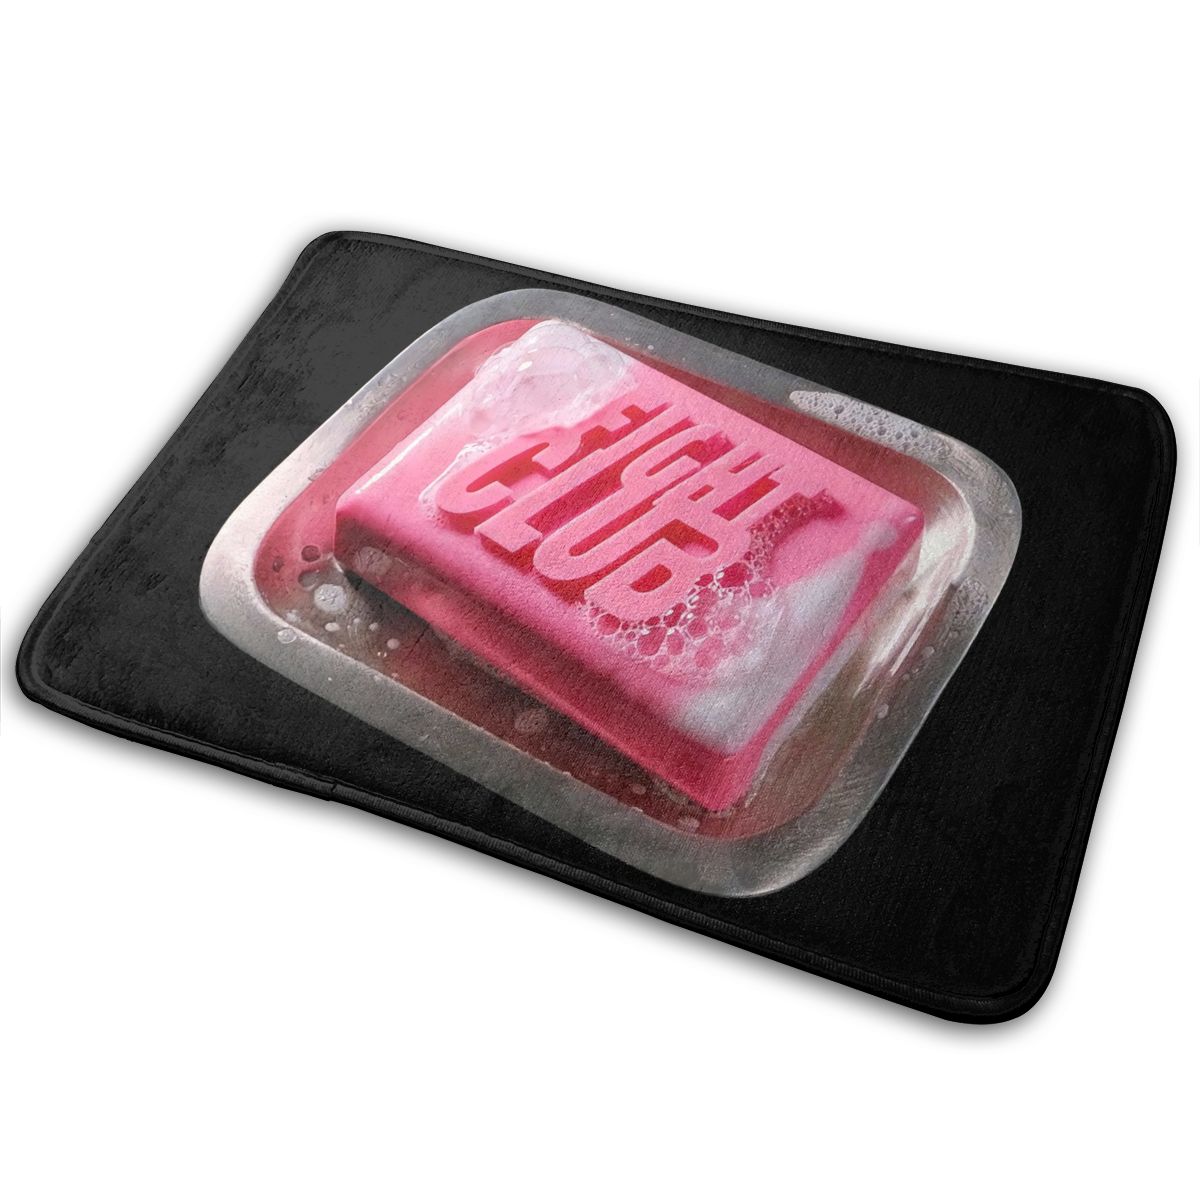 Fight Club Movie Soap - Home Gift - Decoration - Film Prop Replica - Gift For The Movie Lover-